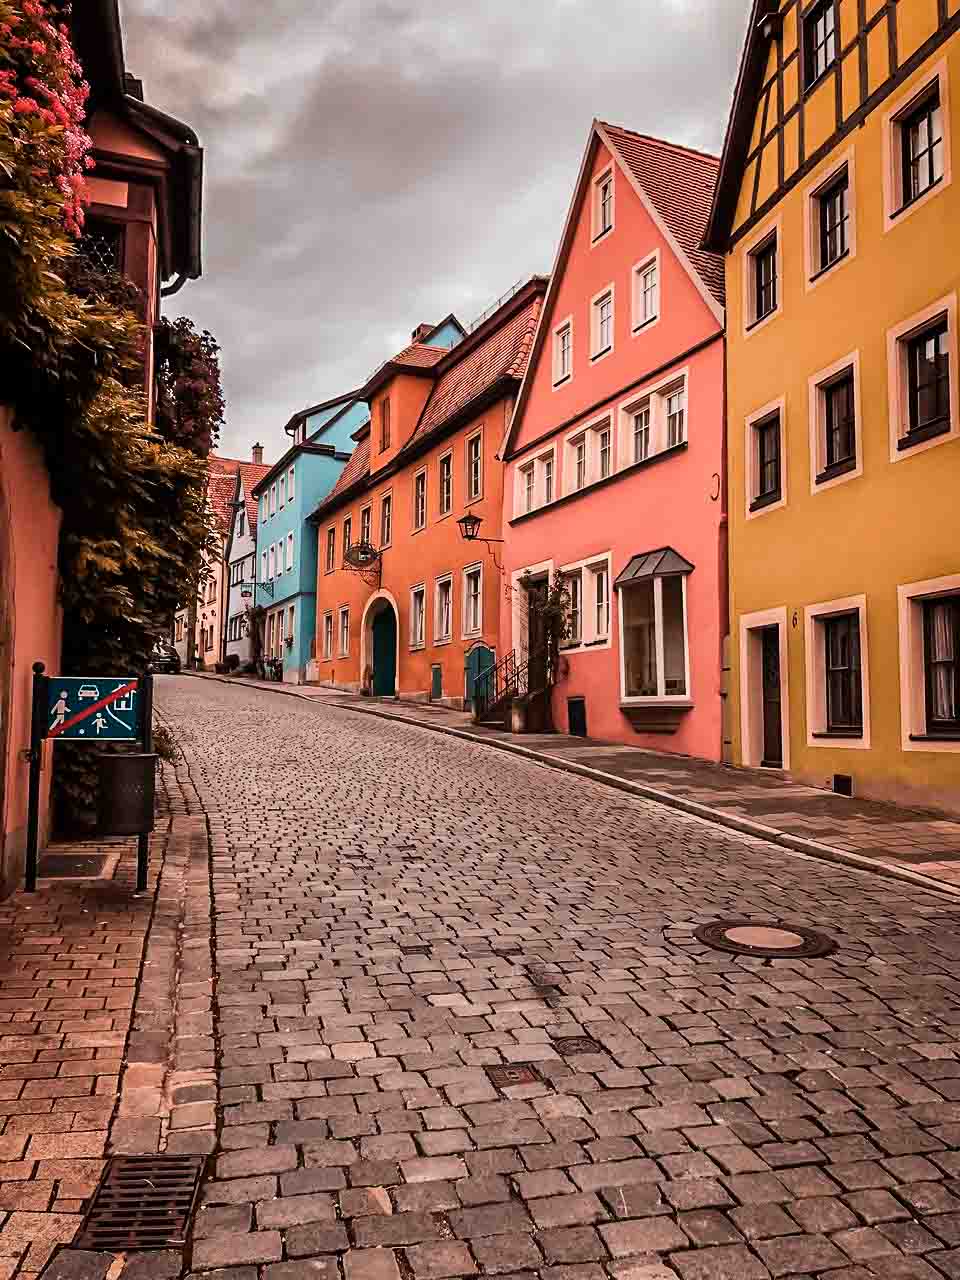 Things to do in Rothenburg: Streets